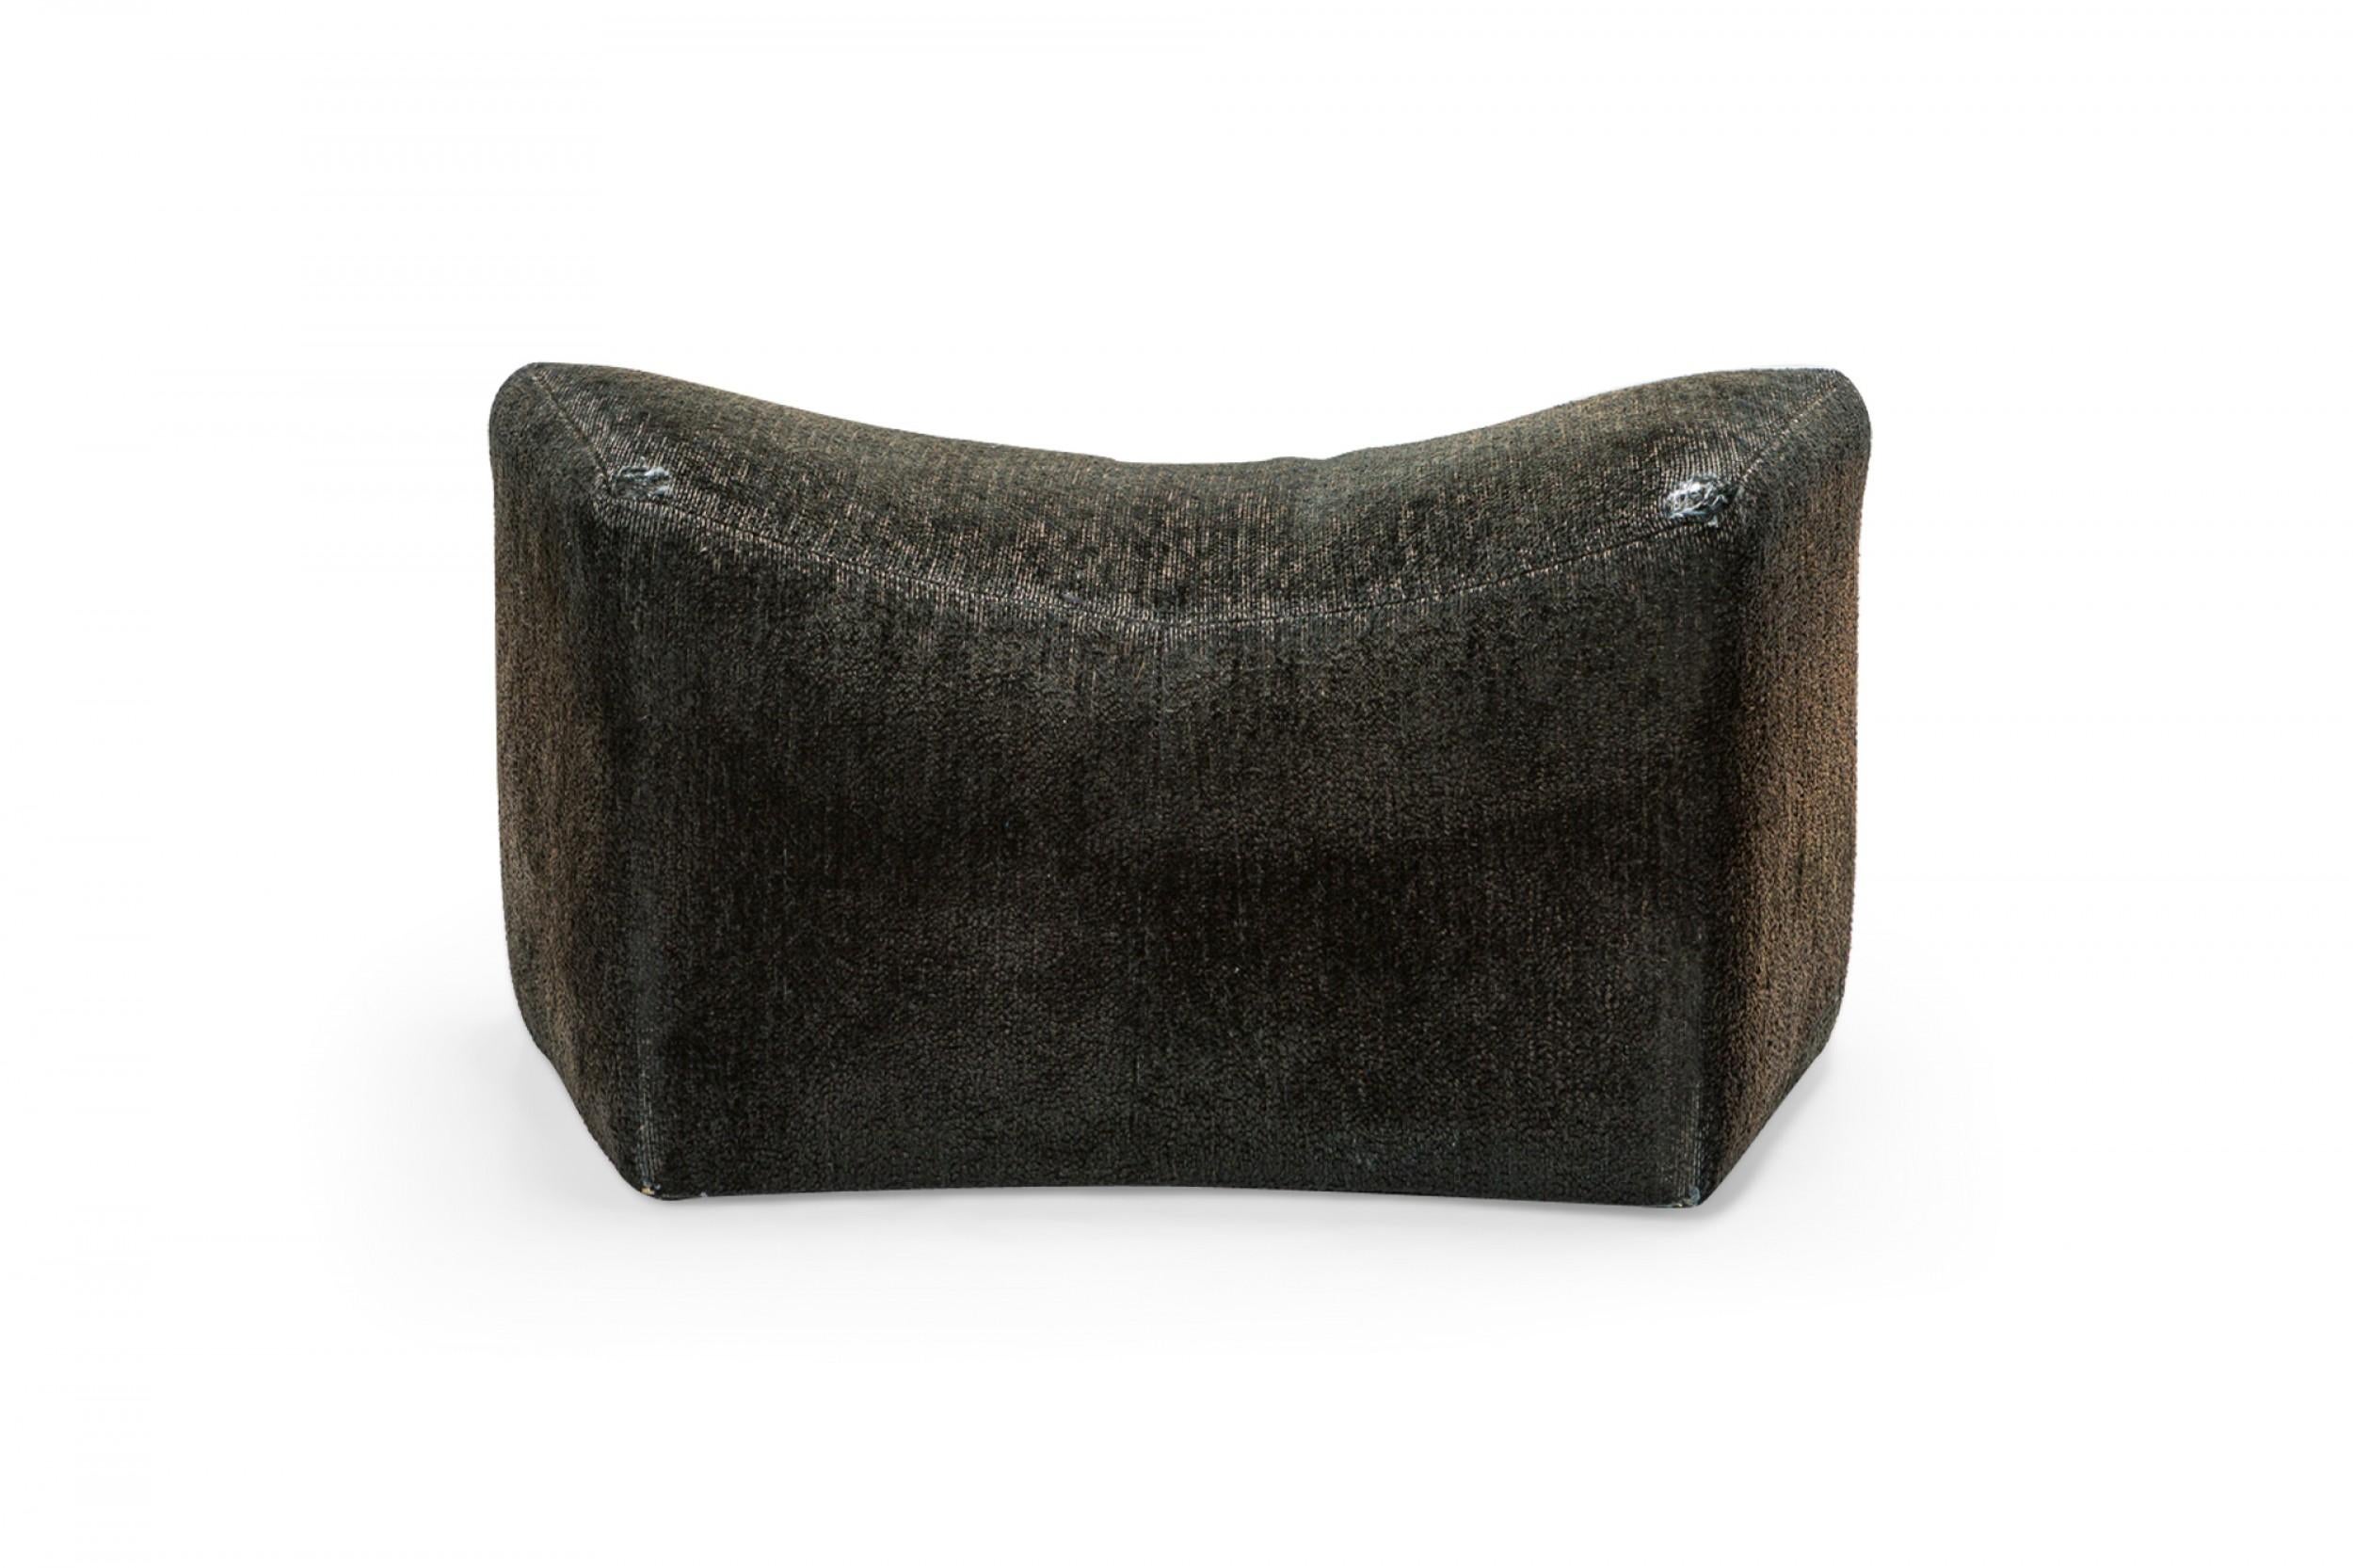 American Mid-Century saddle ottoman with textured black upholstery. (MILO BAUGHMAN)(Pair available in yellow: DUF0344)